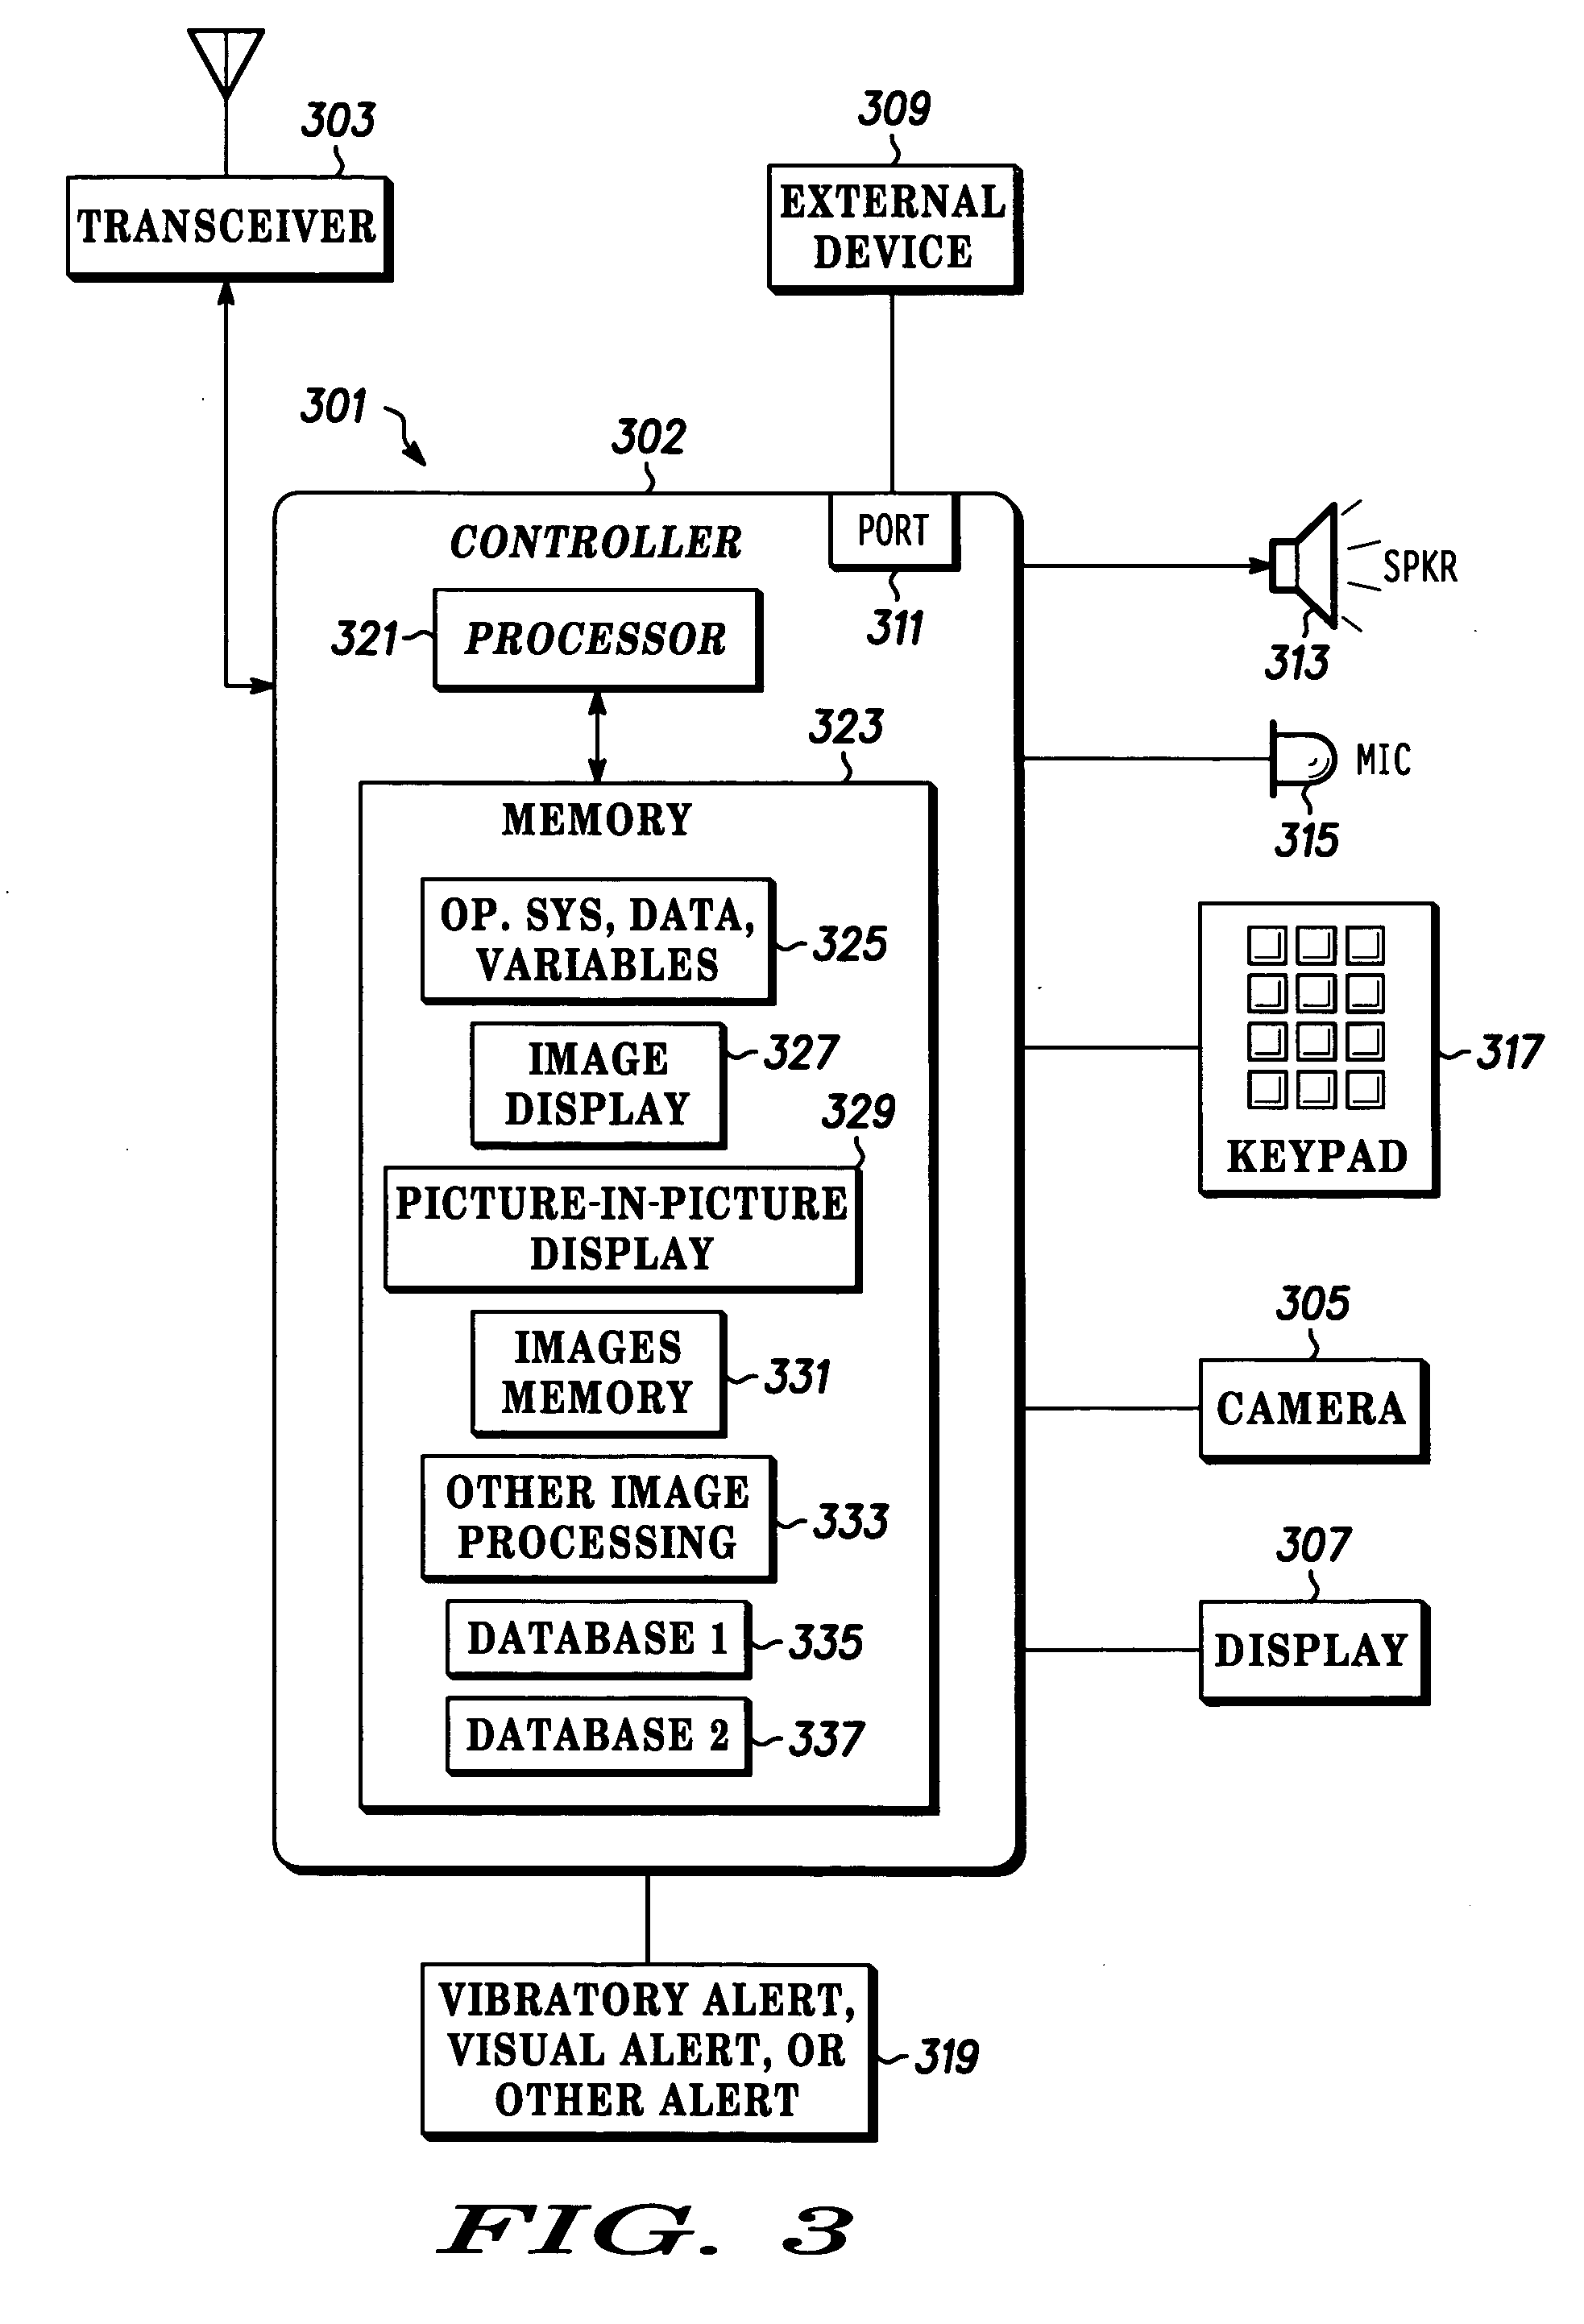 Method and system for providing a dynamic window on a display